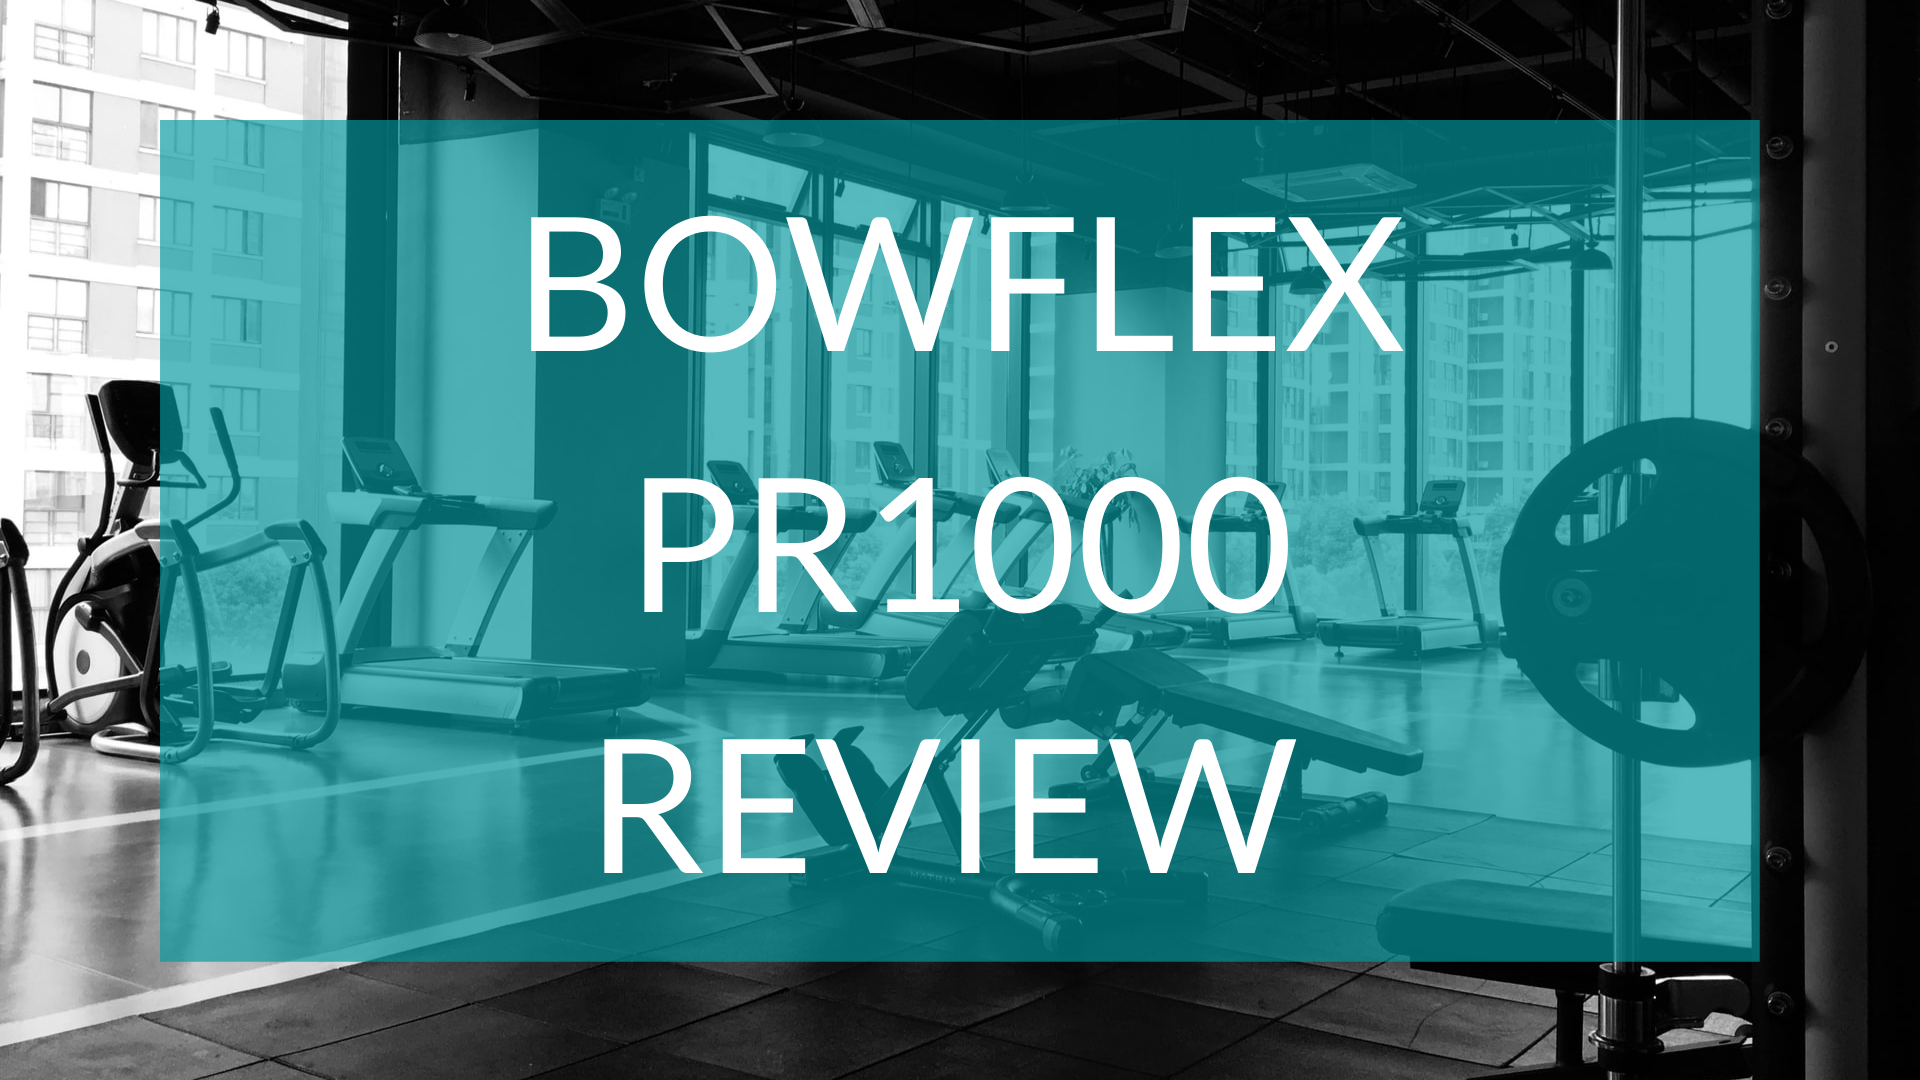 Bowflex PR1000 Review text in front of gym background